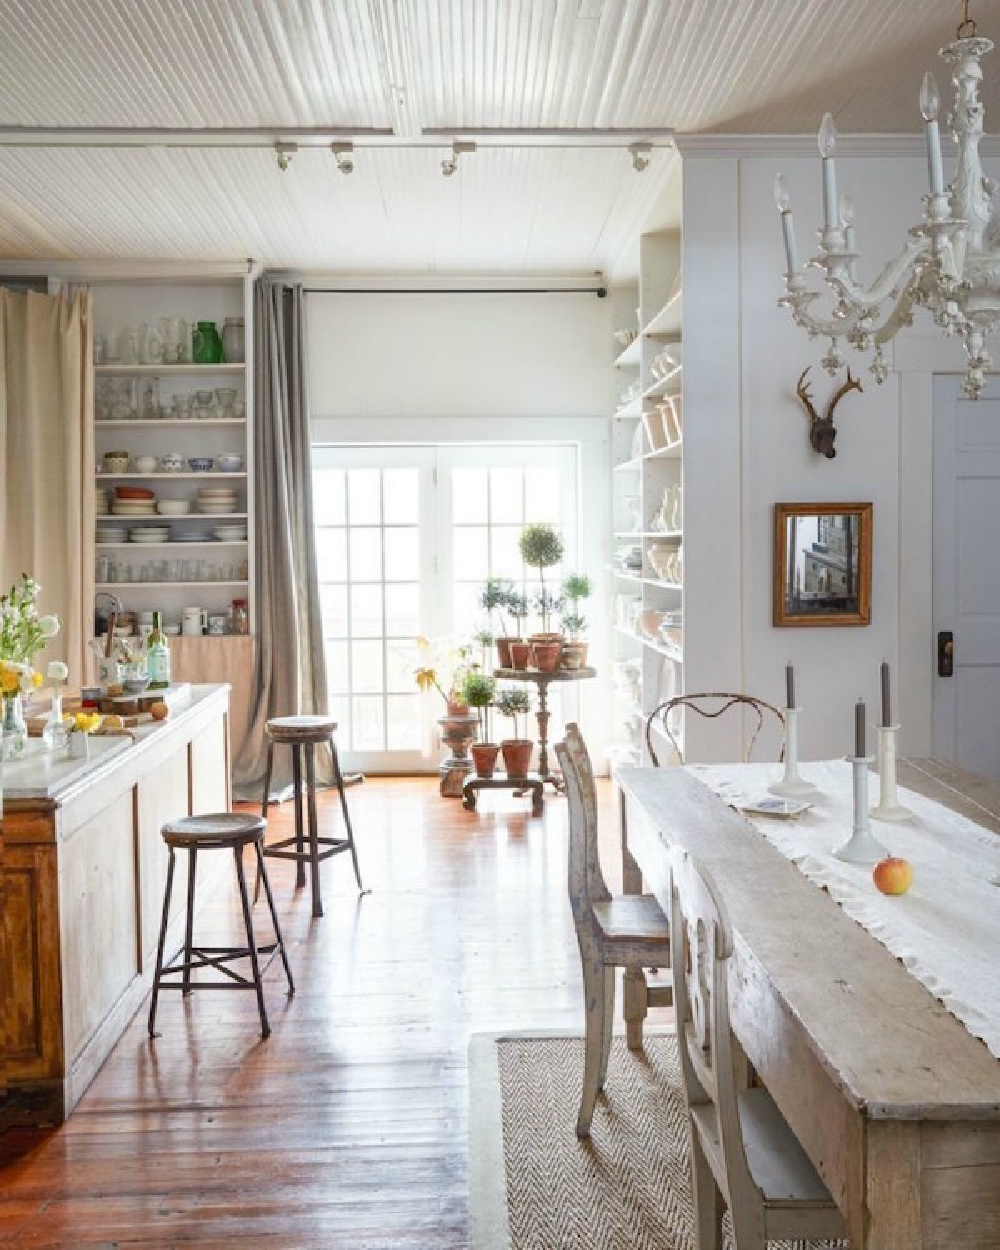 Quiet and humble beauty in a lovely country kitchen and dining area with shabby chic vintage style. A chunky antique farm table mixes with antique mismatched chairs and a white chandelier. #shabbychic #countrykitchen #beadboardceiling